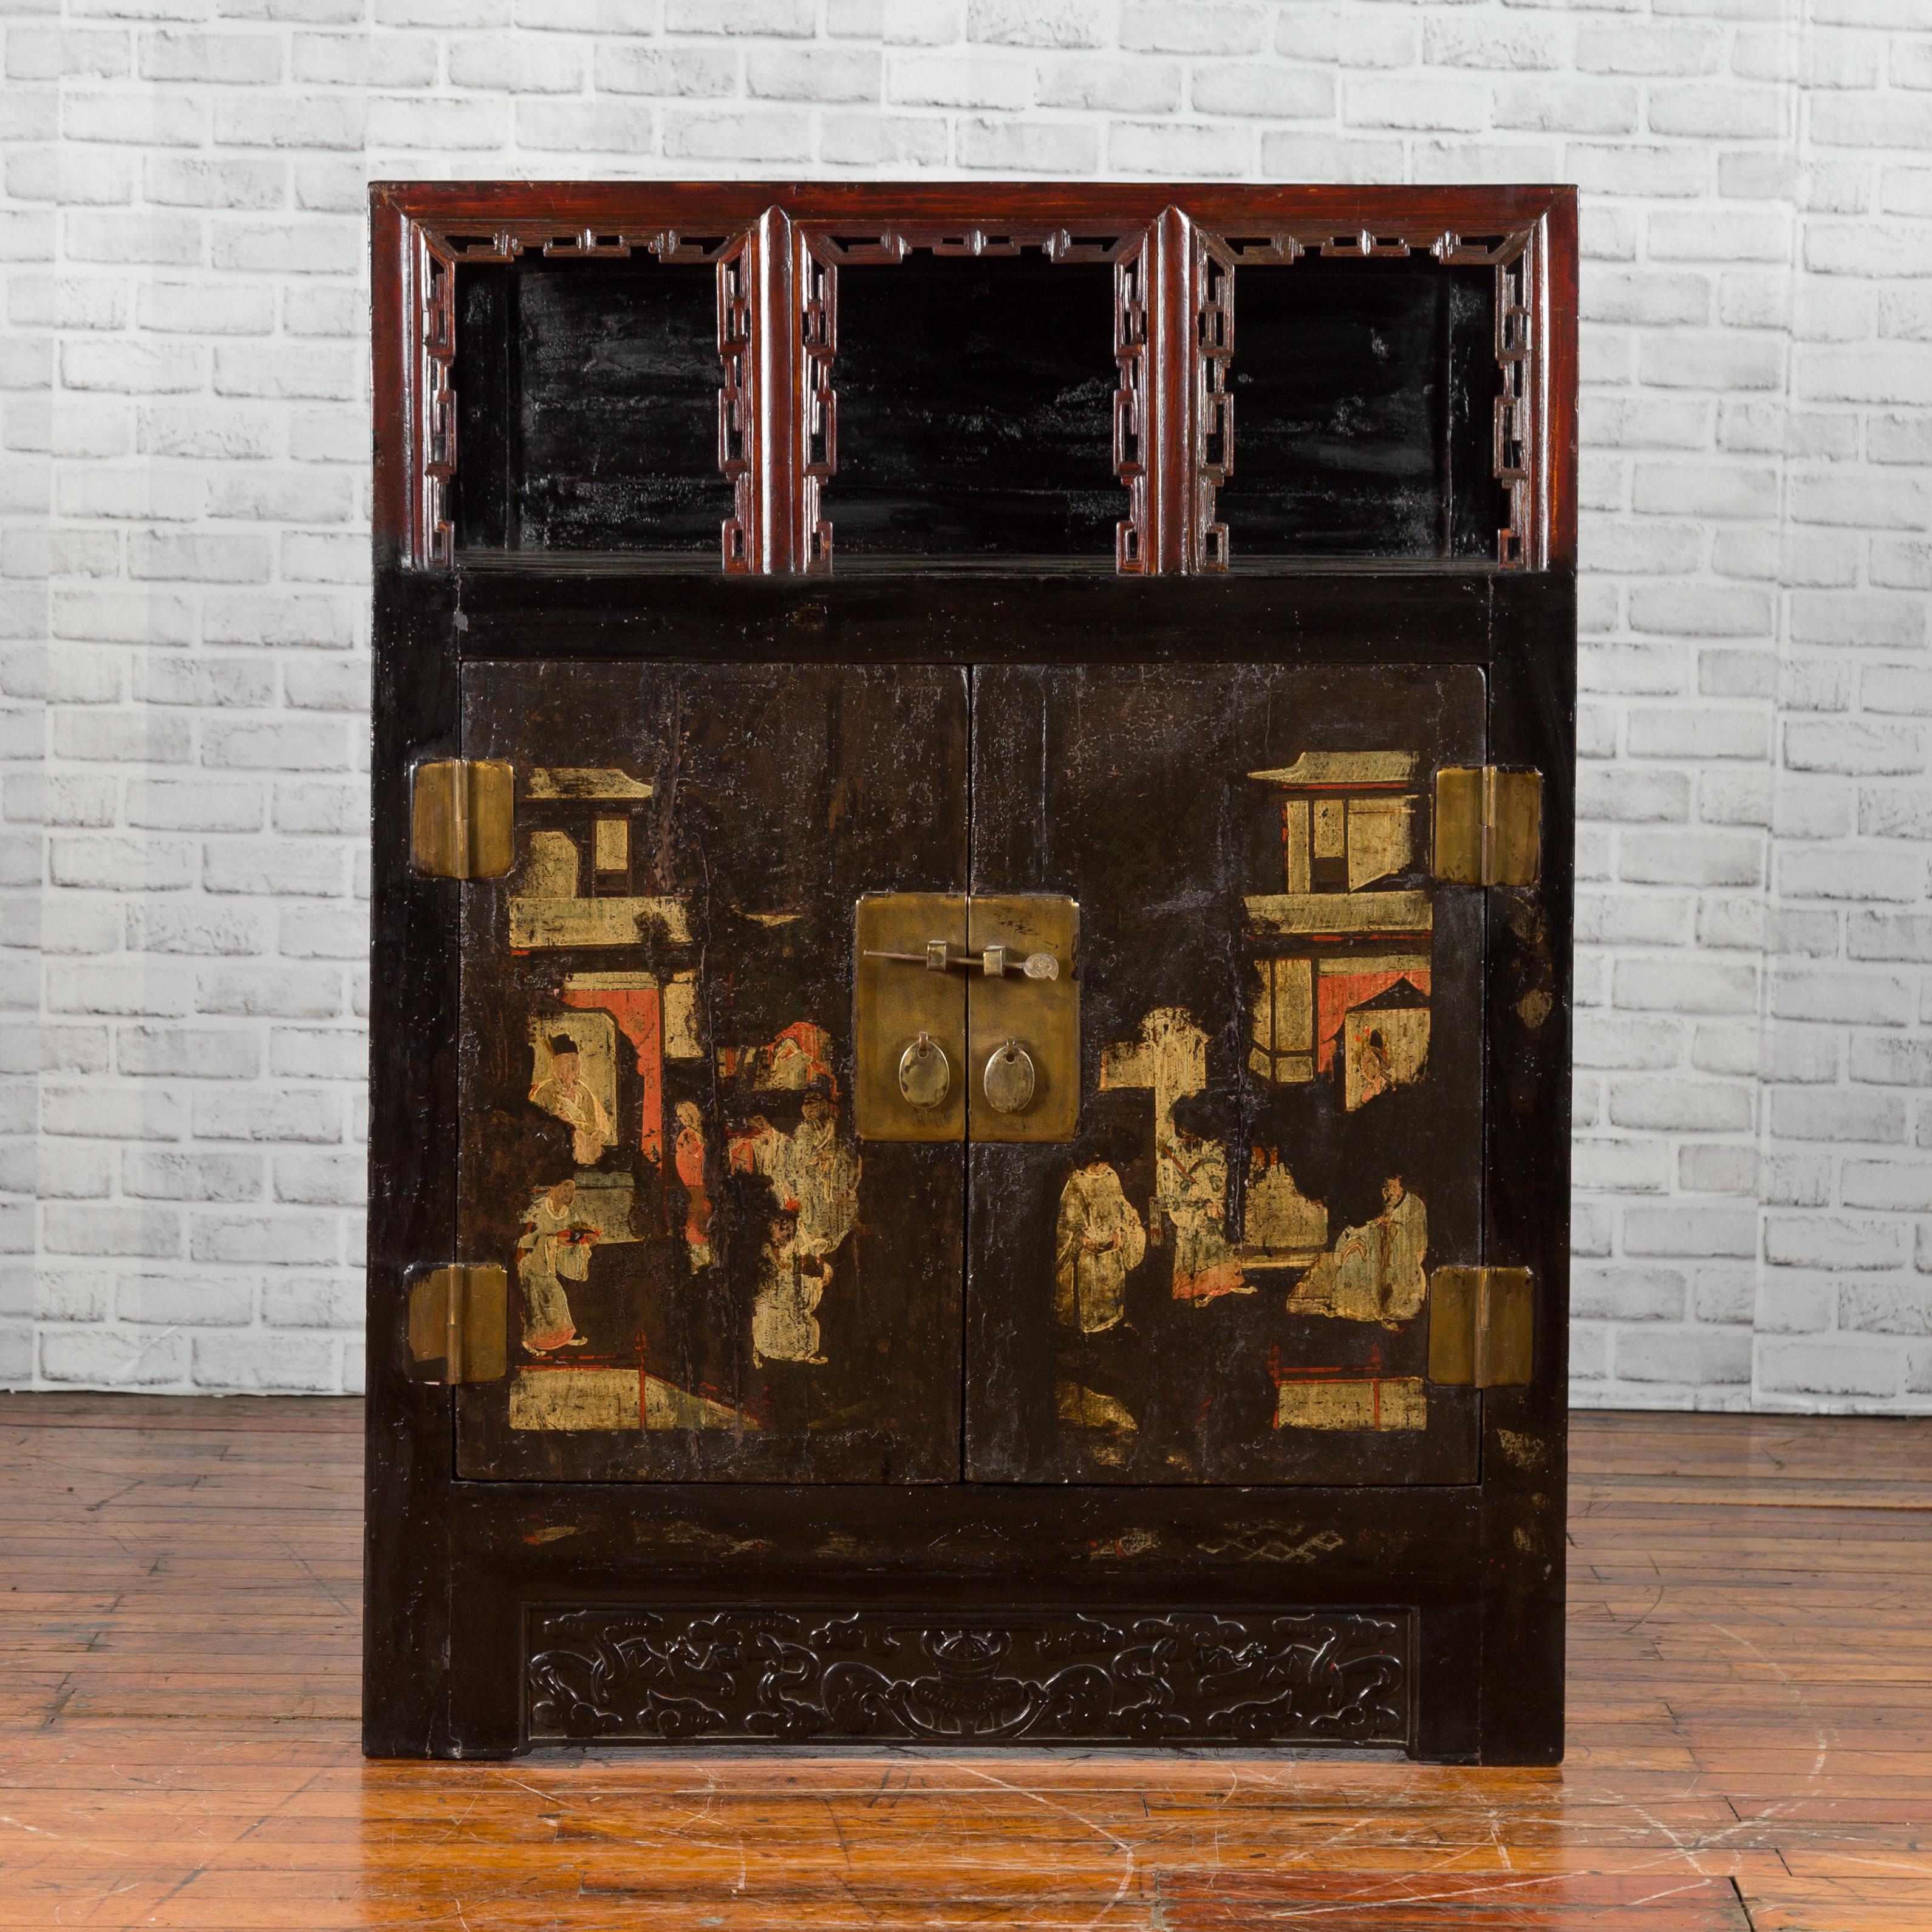 A Chinese Qing Dynasty period cabinet from the 19th century, with original finish and Chinoiserie motifs. Created in China during the Qing Dynasty period, this cabinet features a linear silhouette perfectly complimented by a dark brown lacquer. The